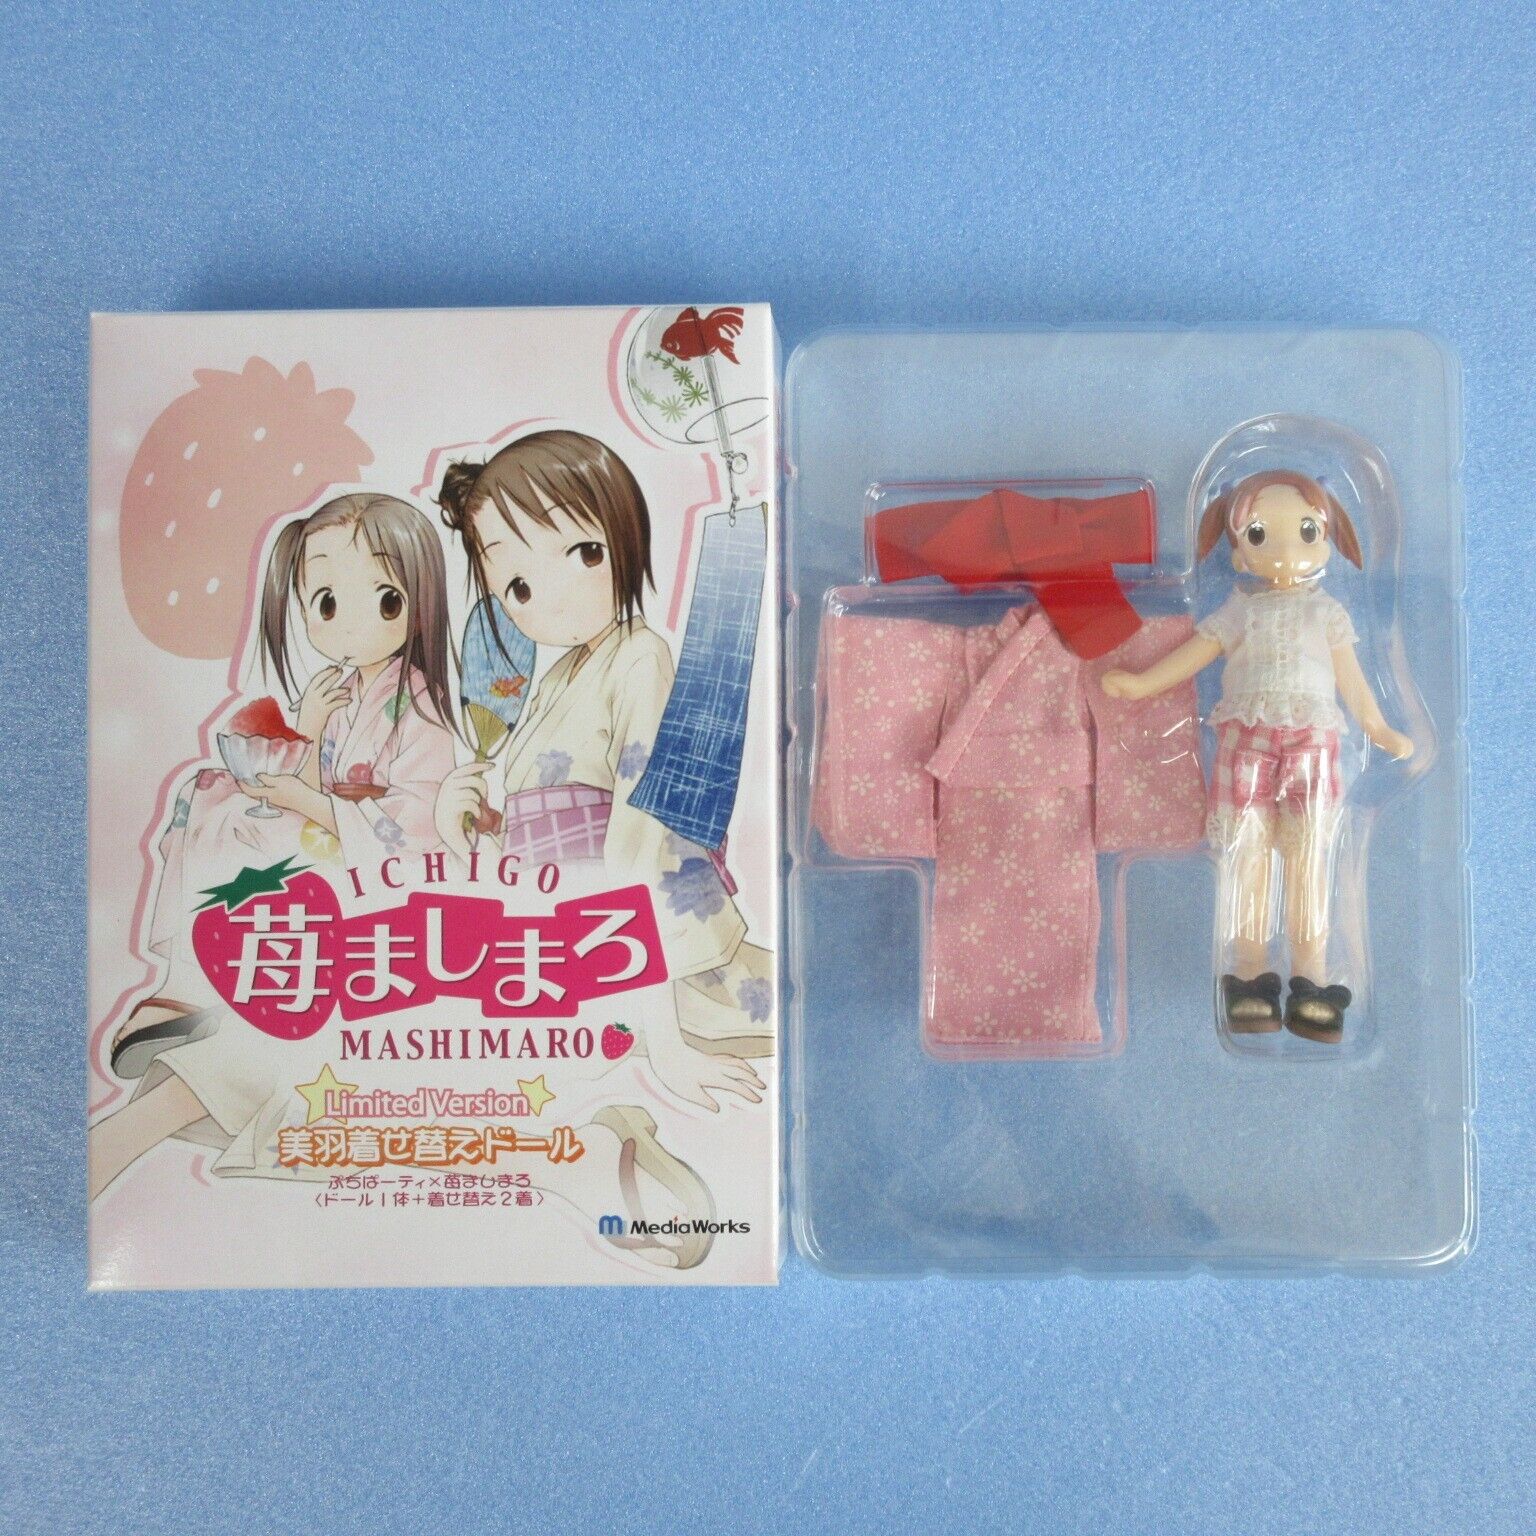 Strawberry Marshmallow Miu Matsuoka PS2 Limited Figure official authentic